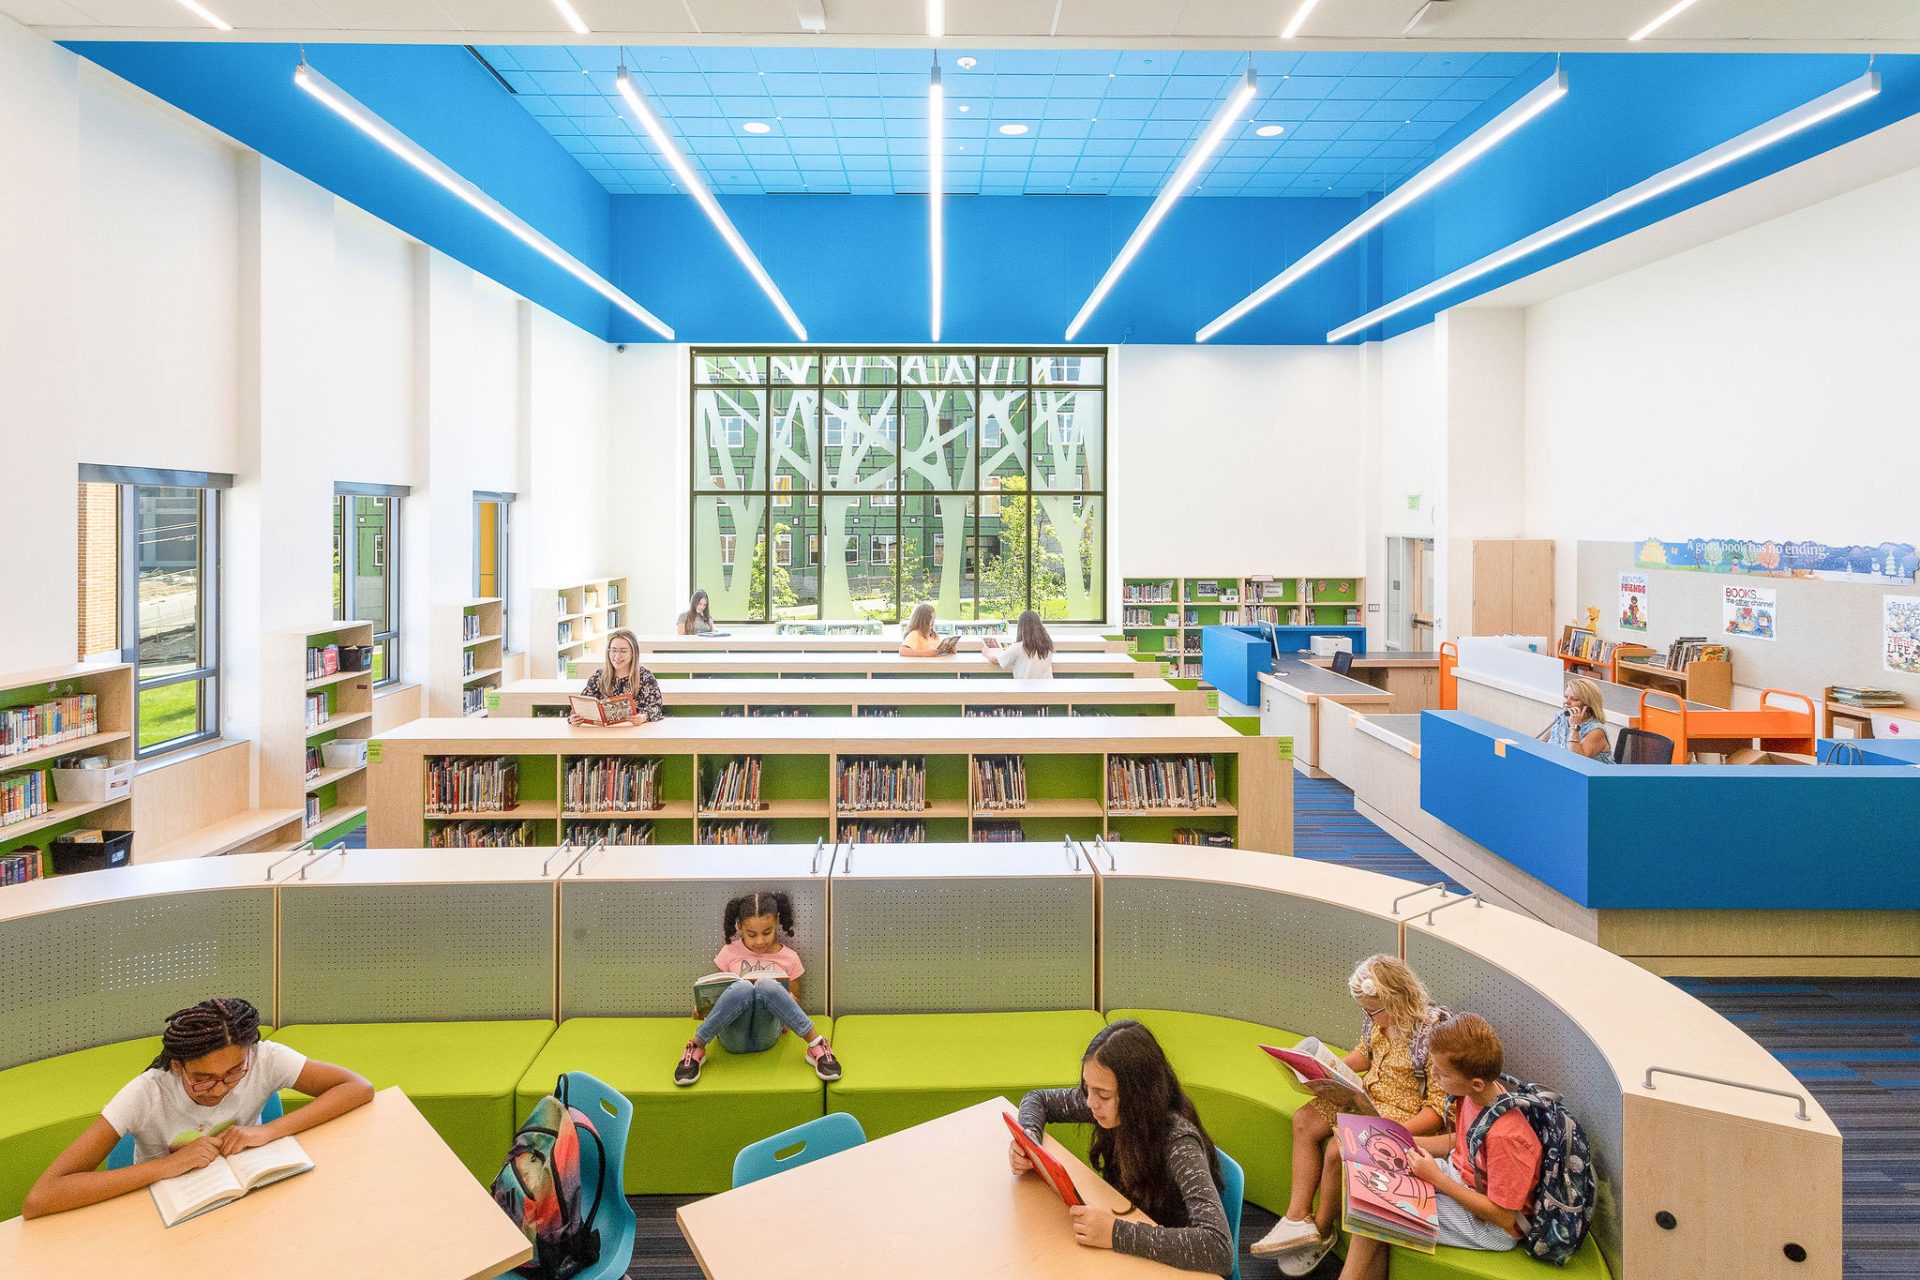 Easton’s Cheston Elementary School was designed by Alloy5 to act as an anchor for a neighborhood in transition with a secure, academic wing and inviting community and green space. Photo by Karlo Gessner.